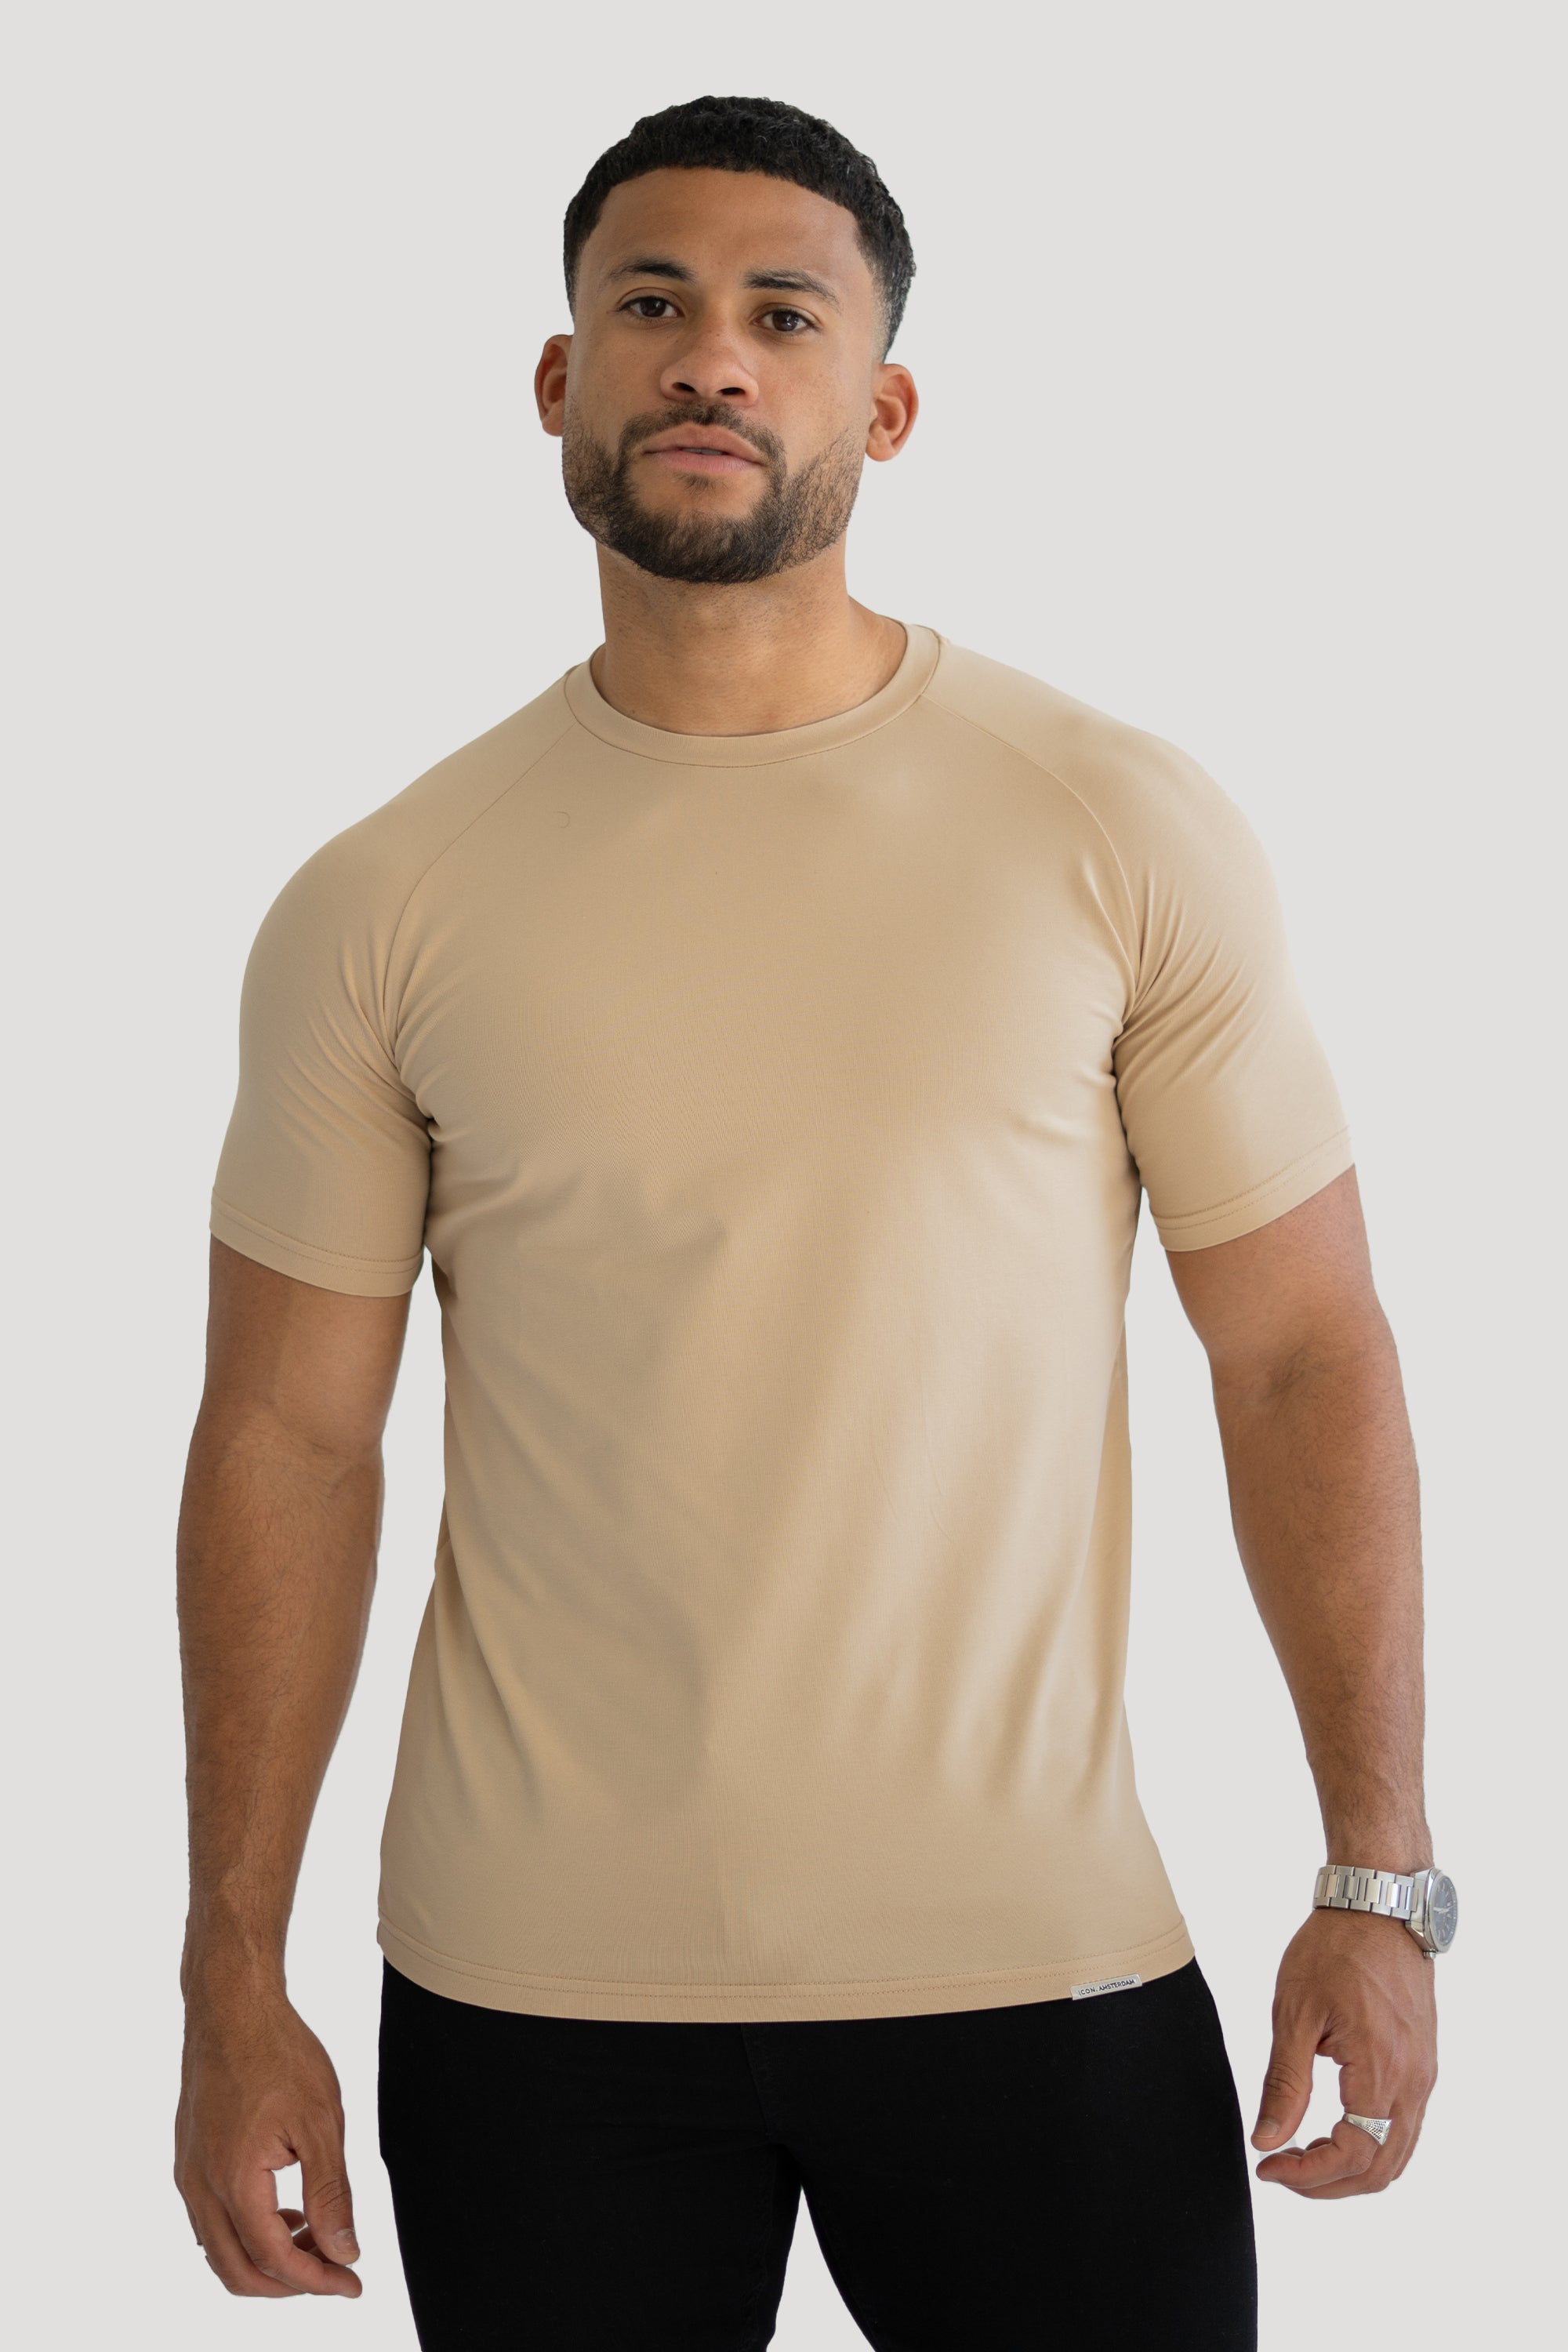 THE MUSCLE BASIC T-SHIRT - CREMA IRLANDESE